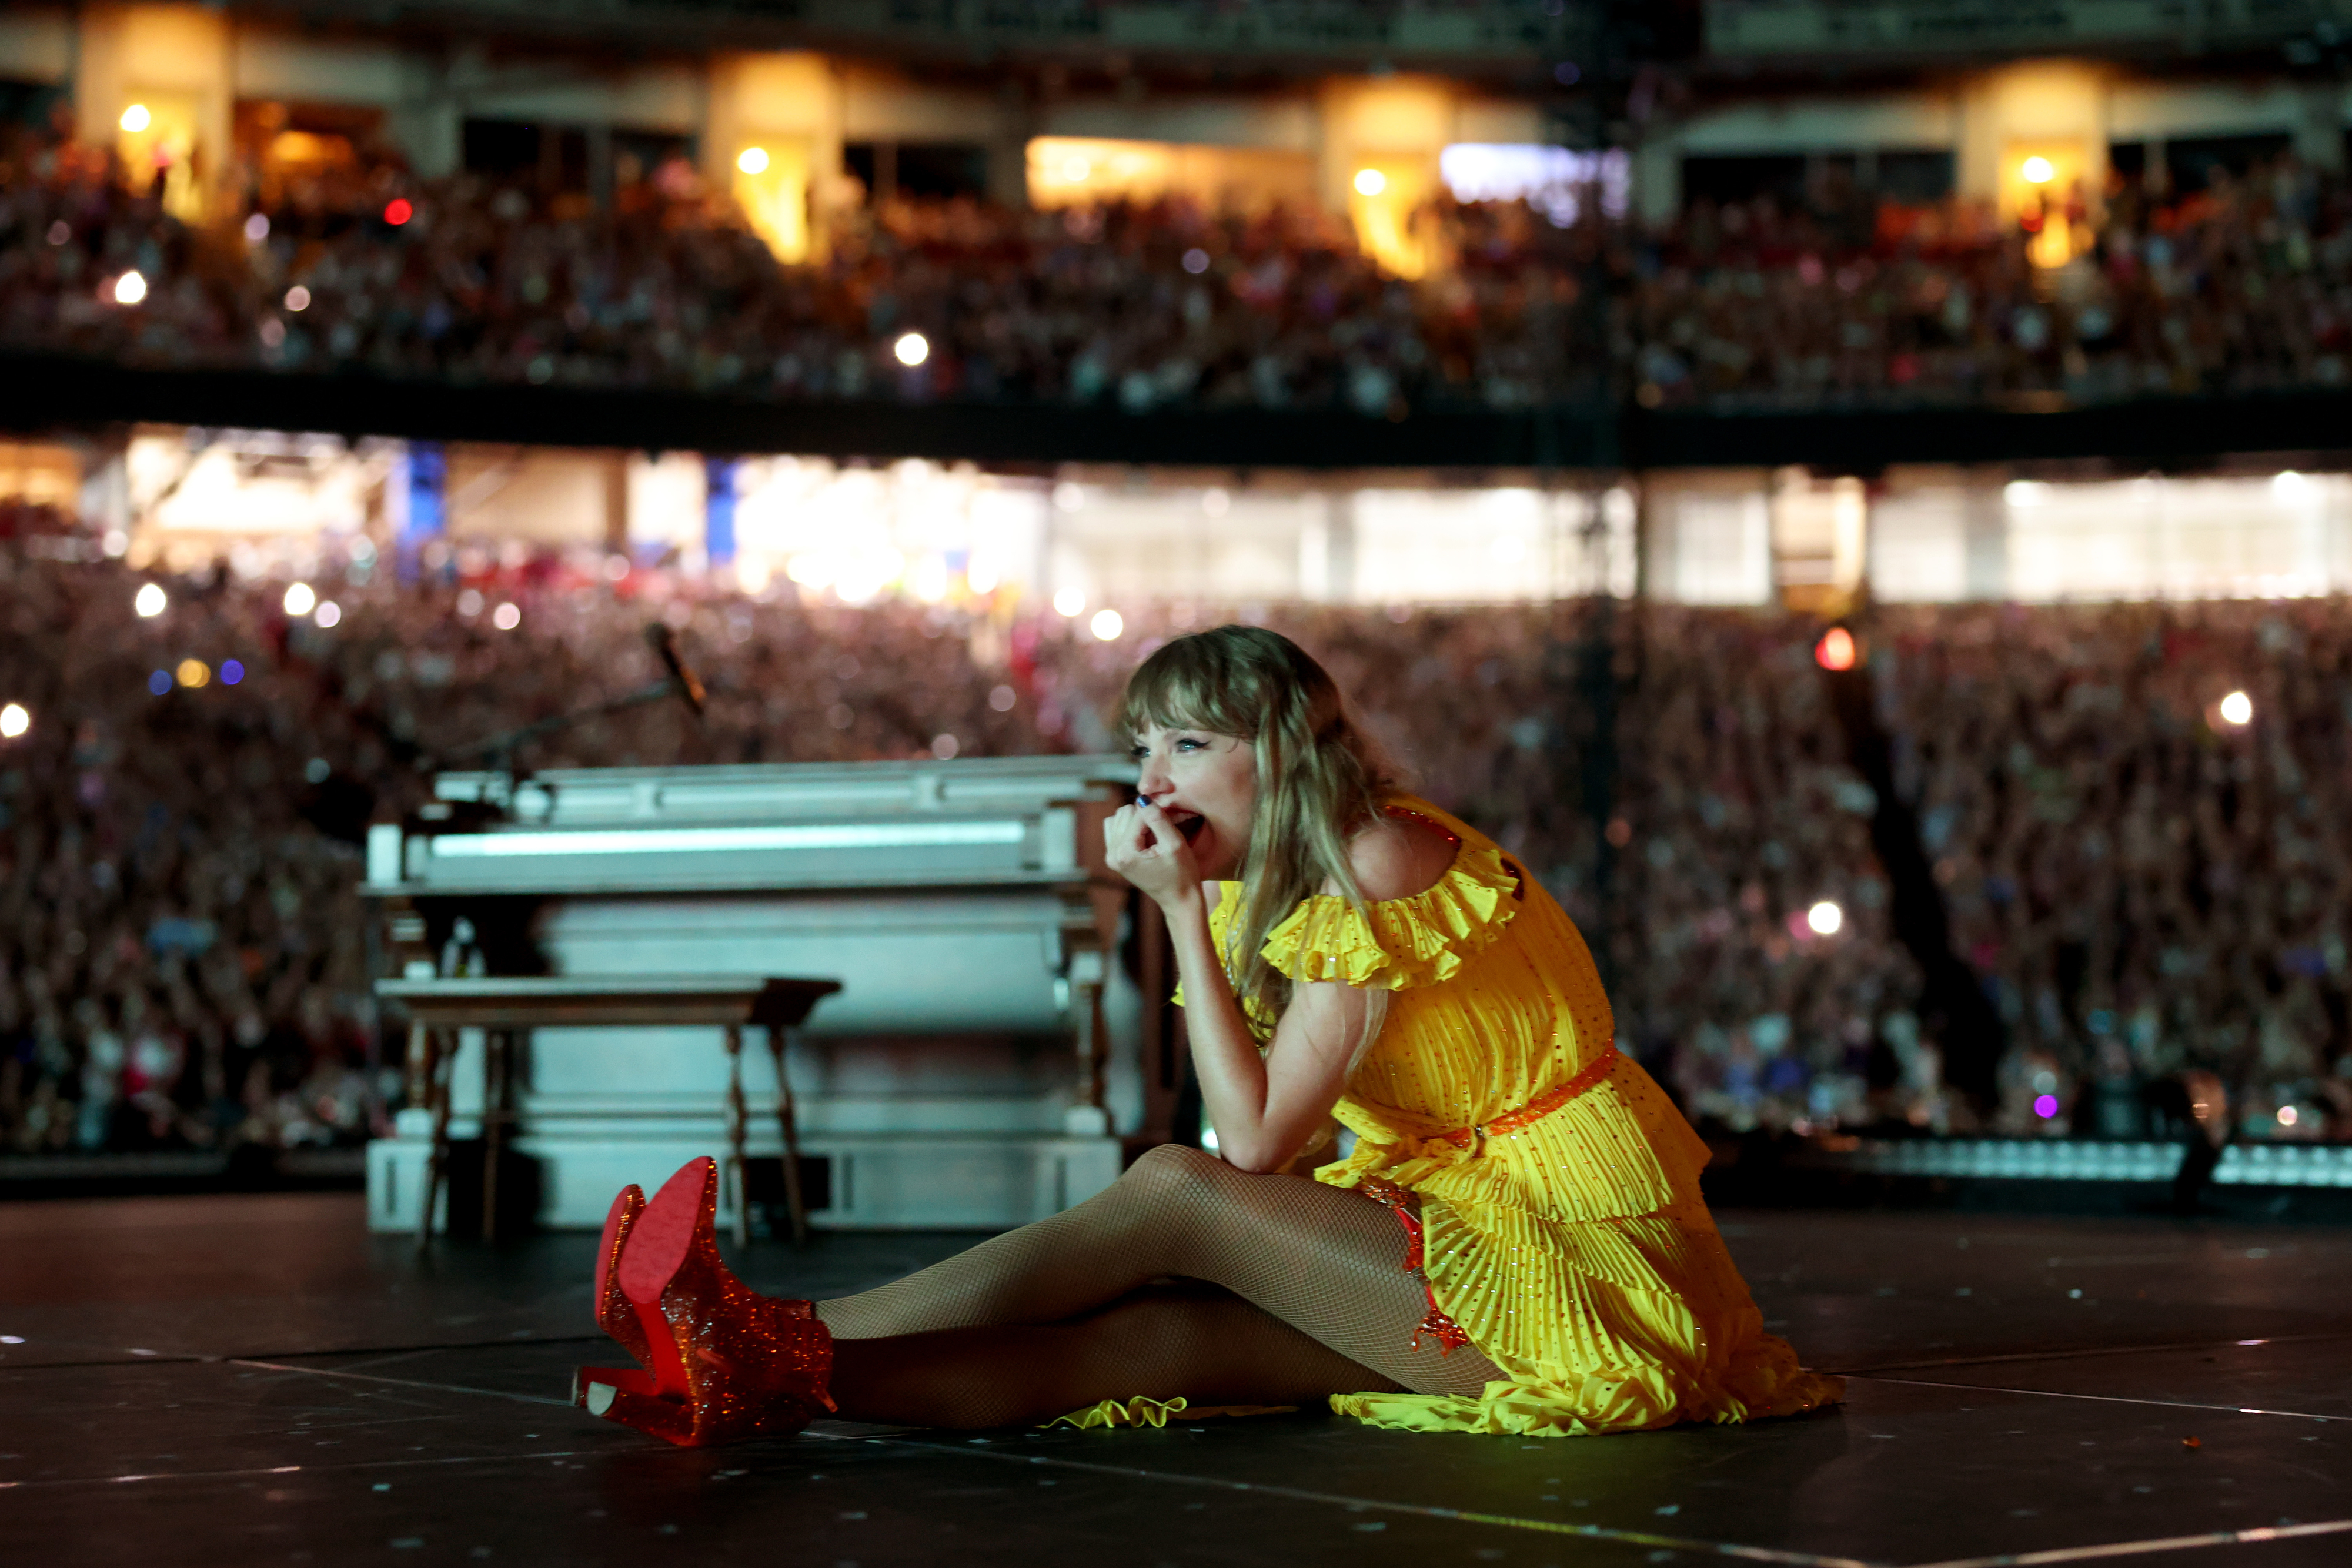 Taylor sitting on stage to watch the video with fans